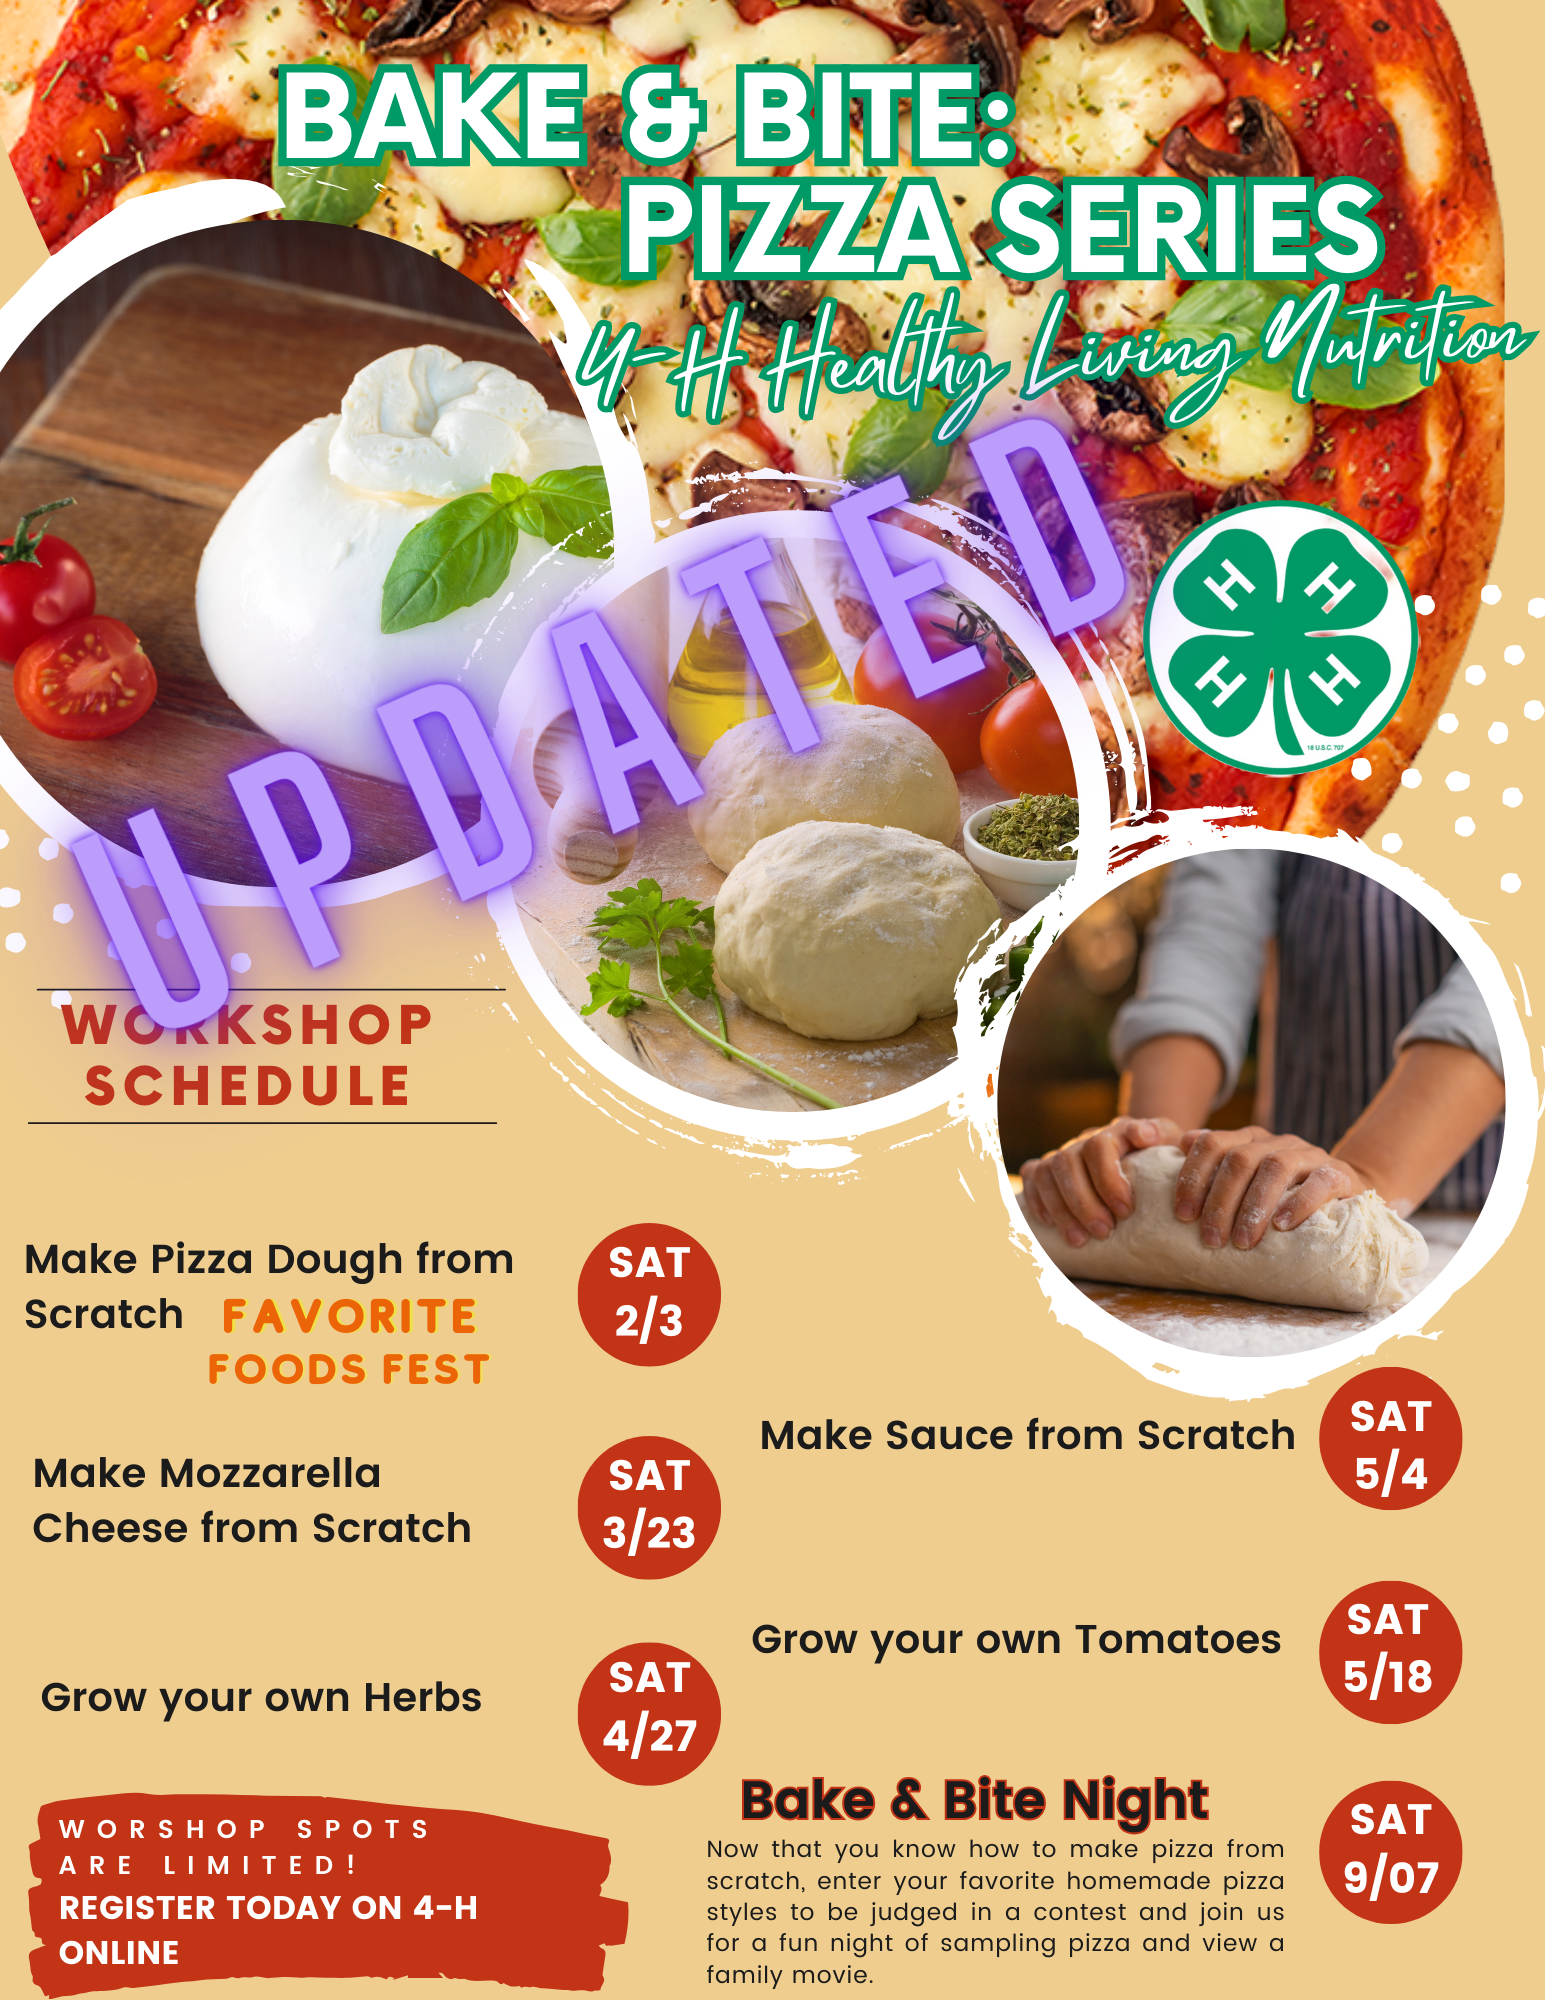 4-H Bake and Bite DIY Pizza Series - Make Mozzarella Cheese from Scratch